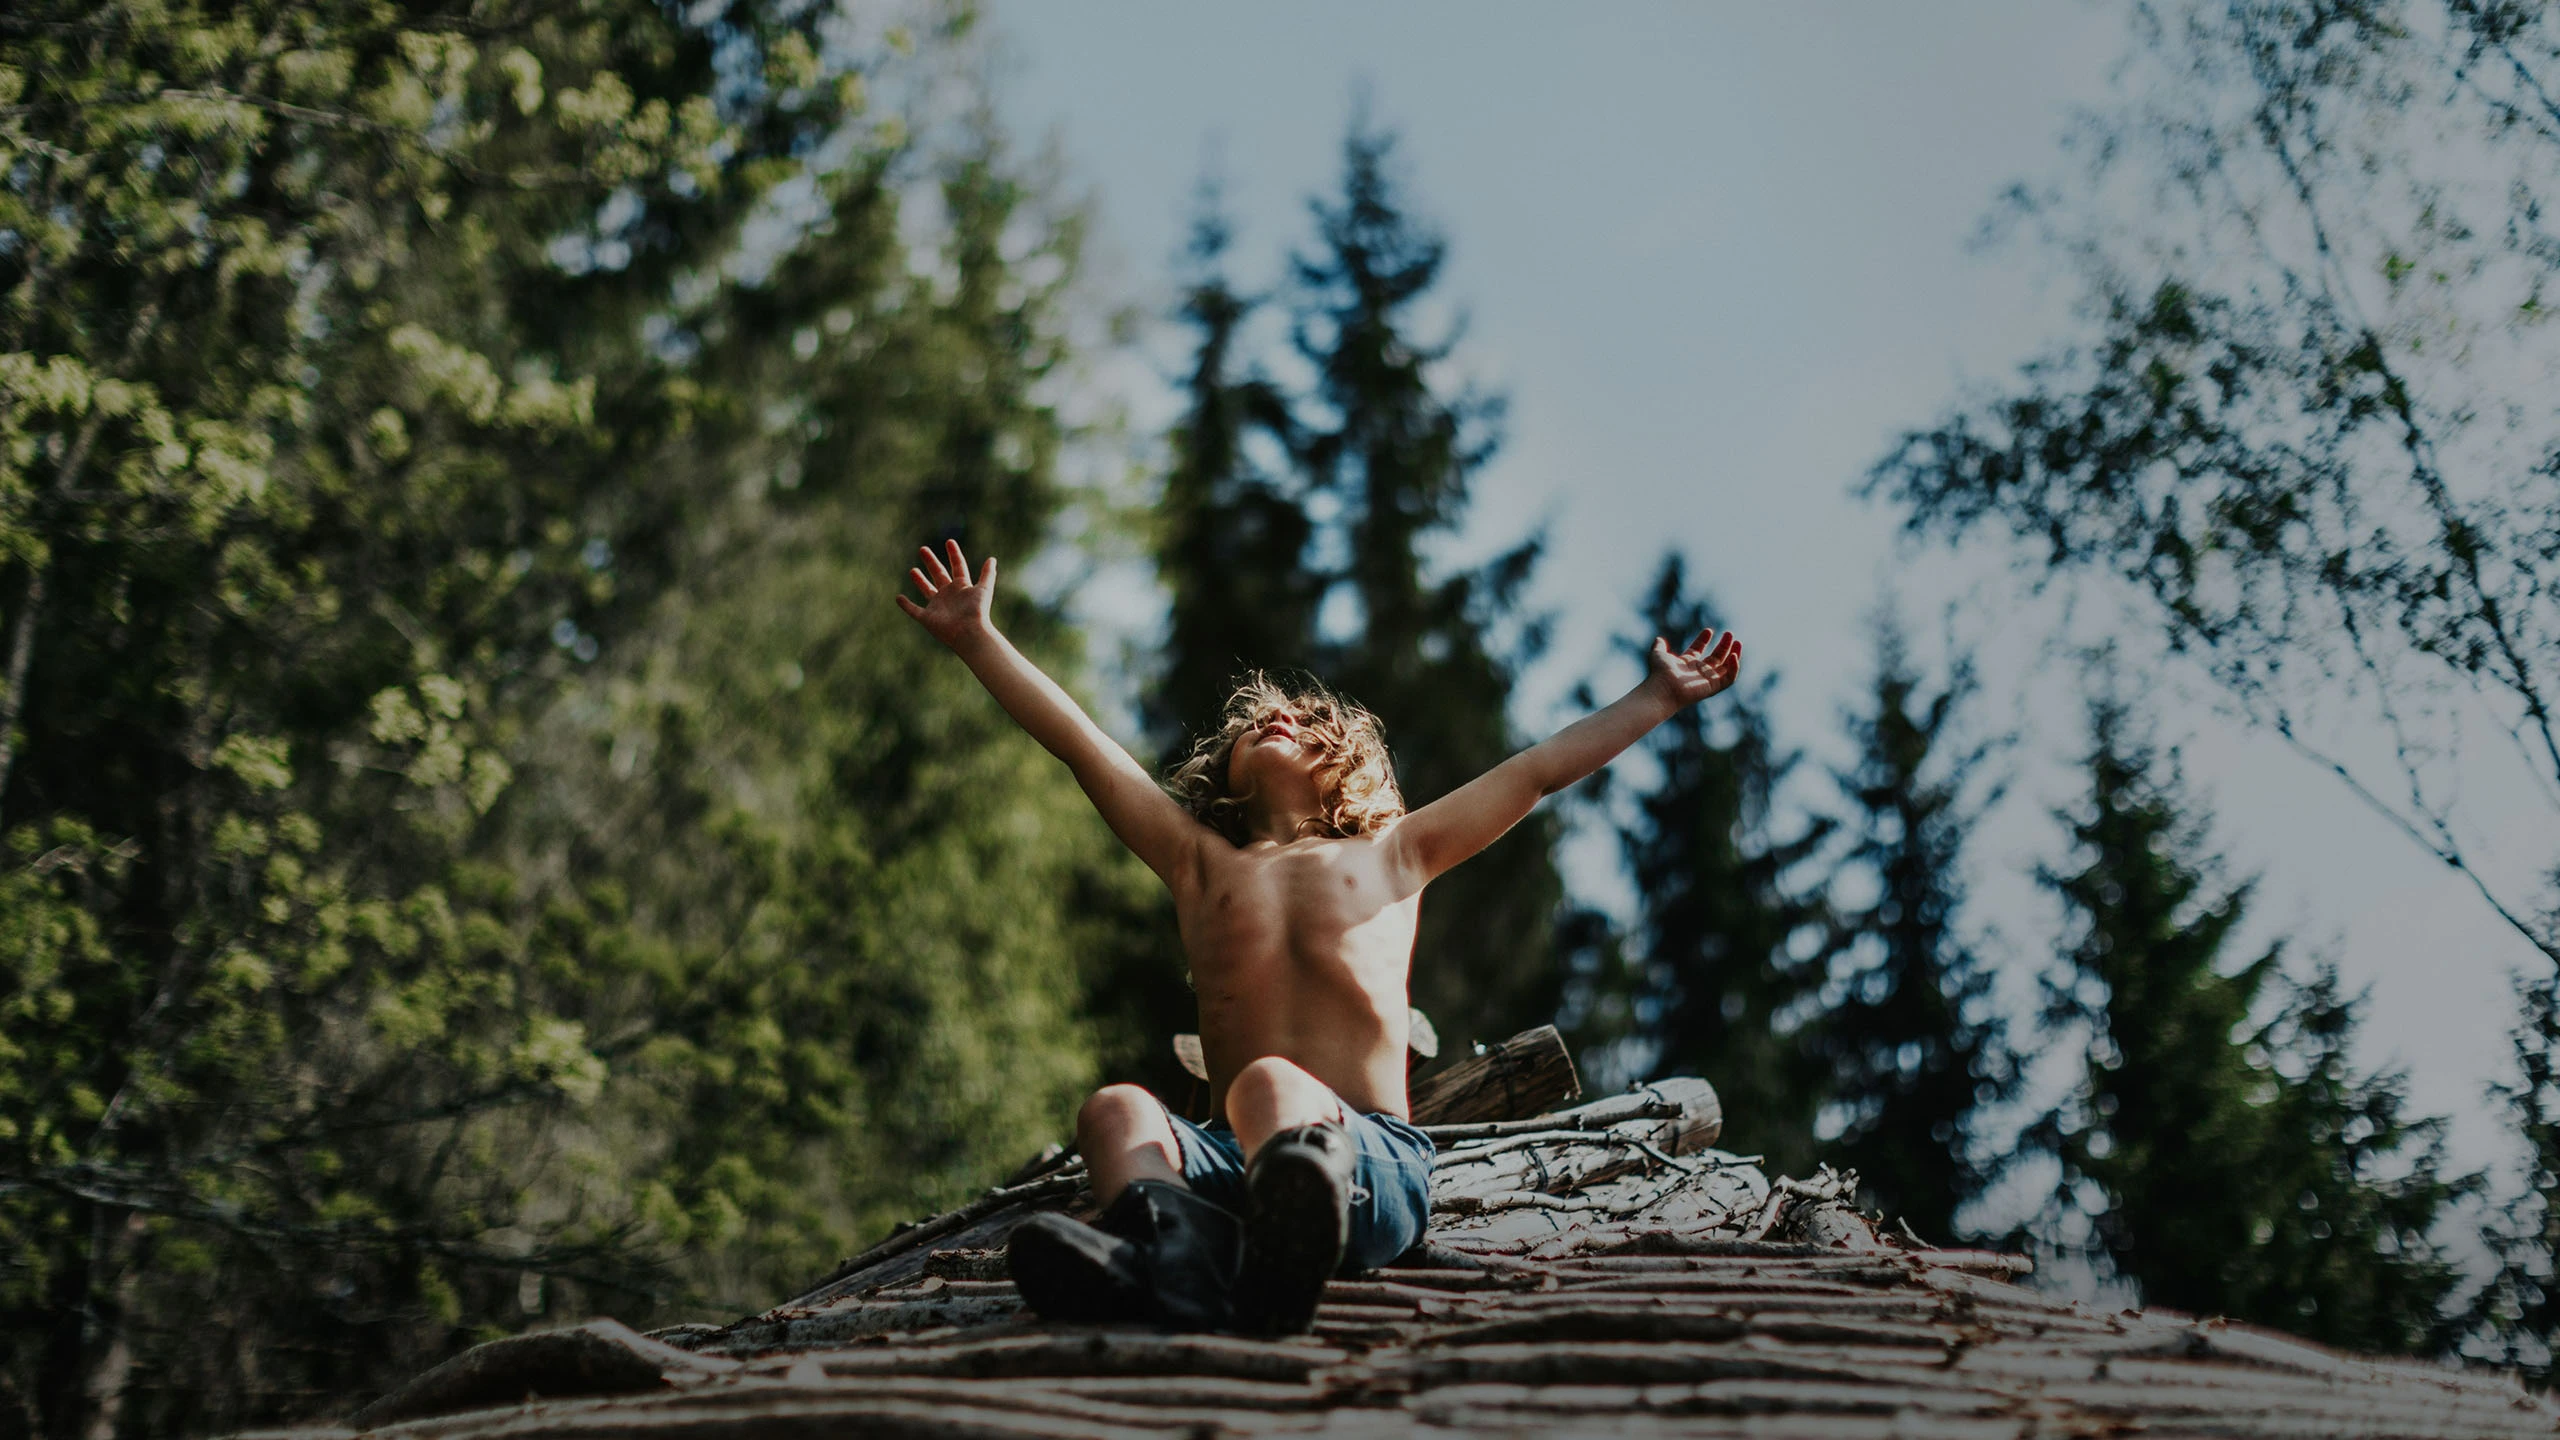 A child sits on a pile of wood in the forest, arms outstretched.